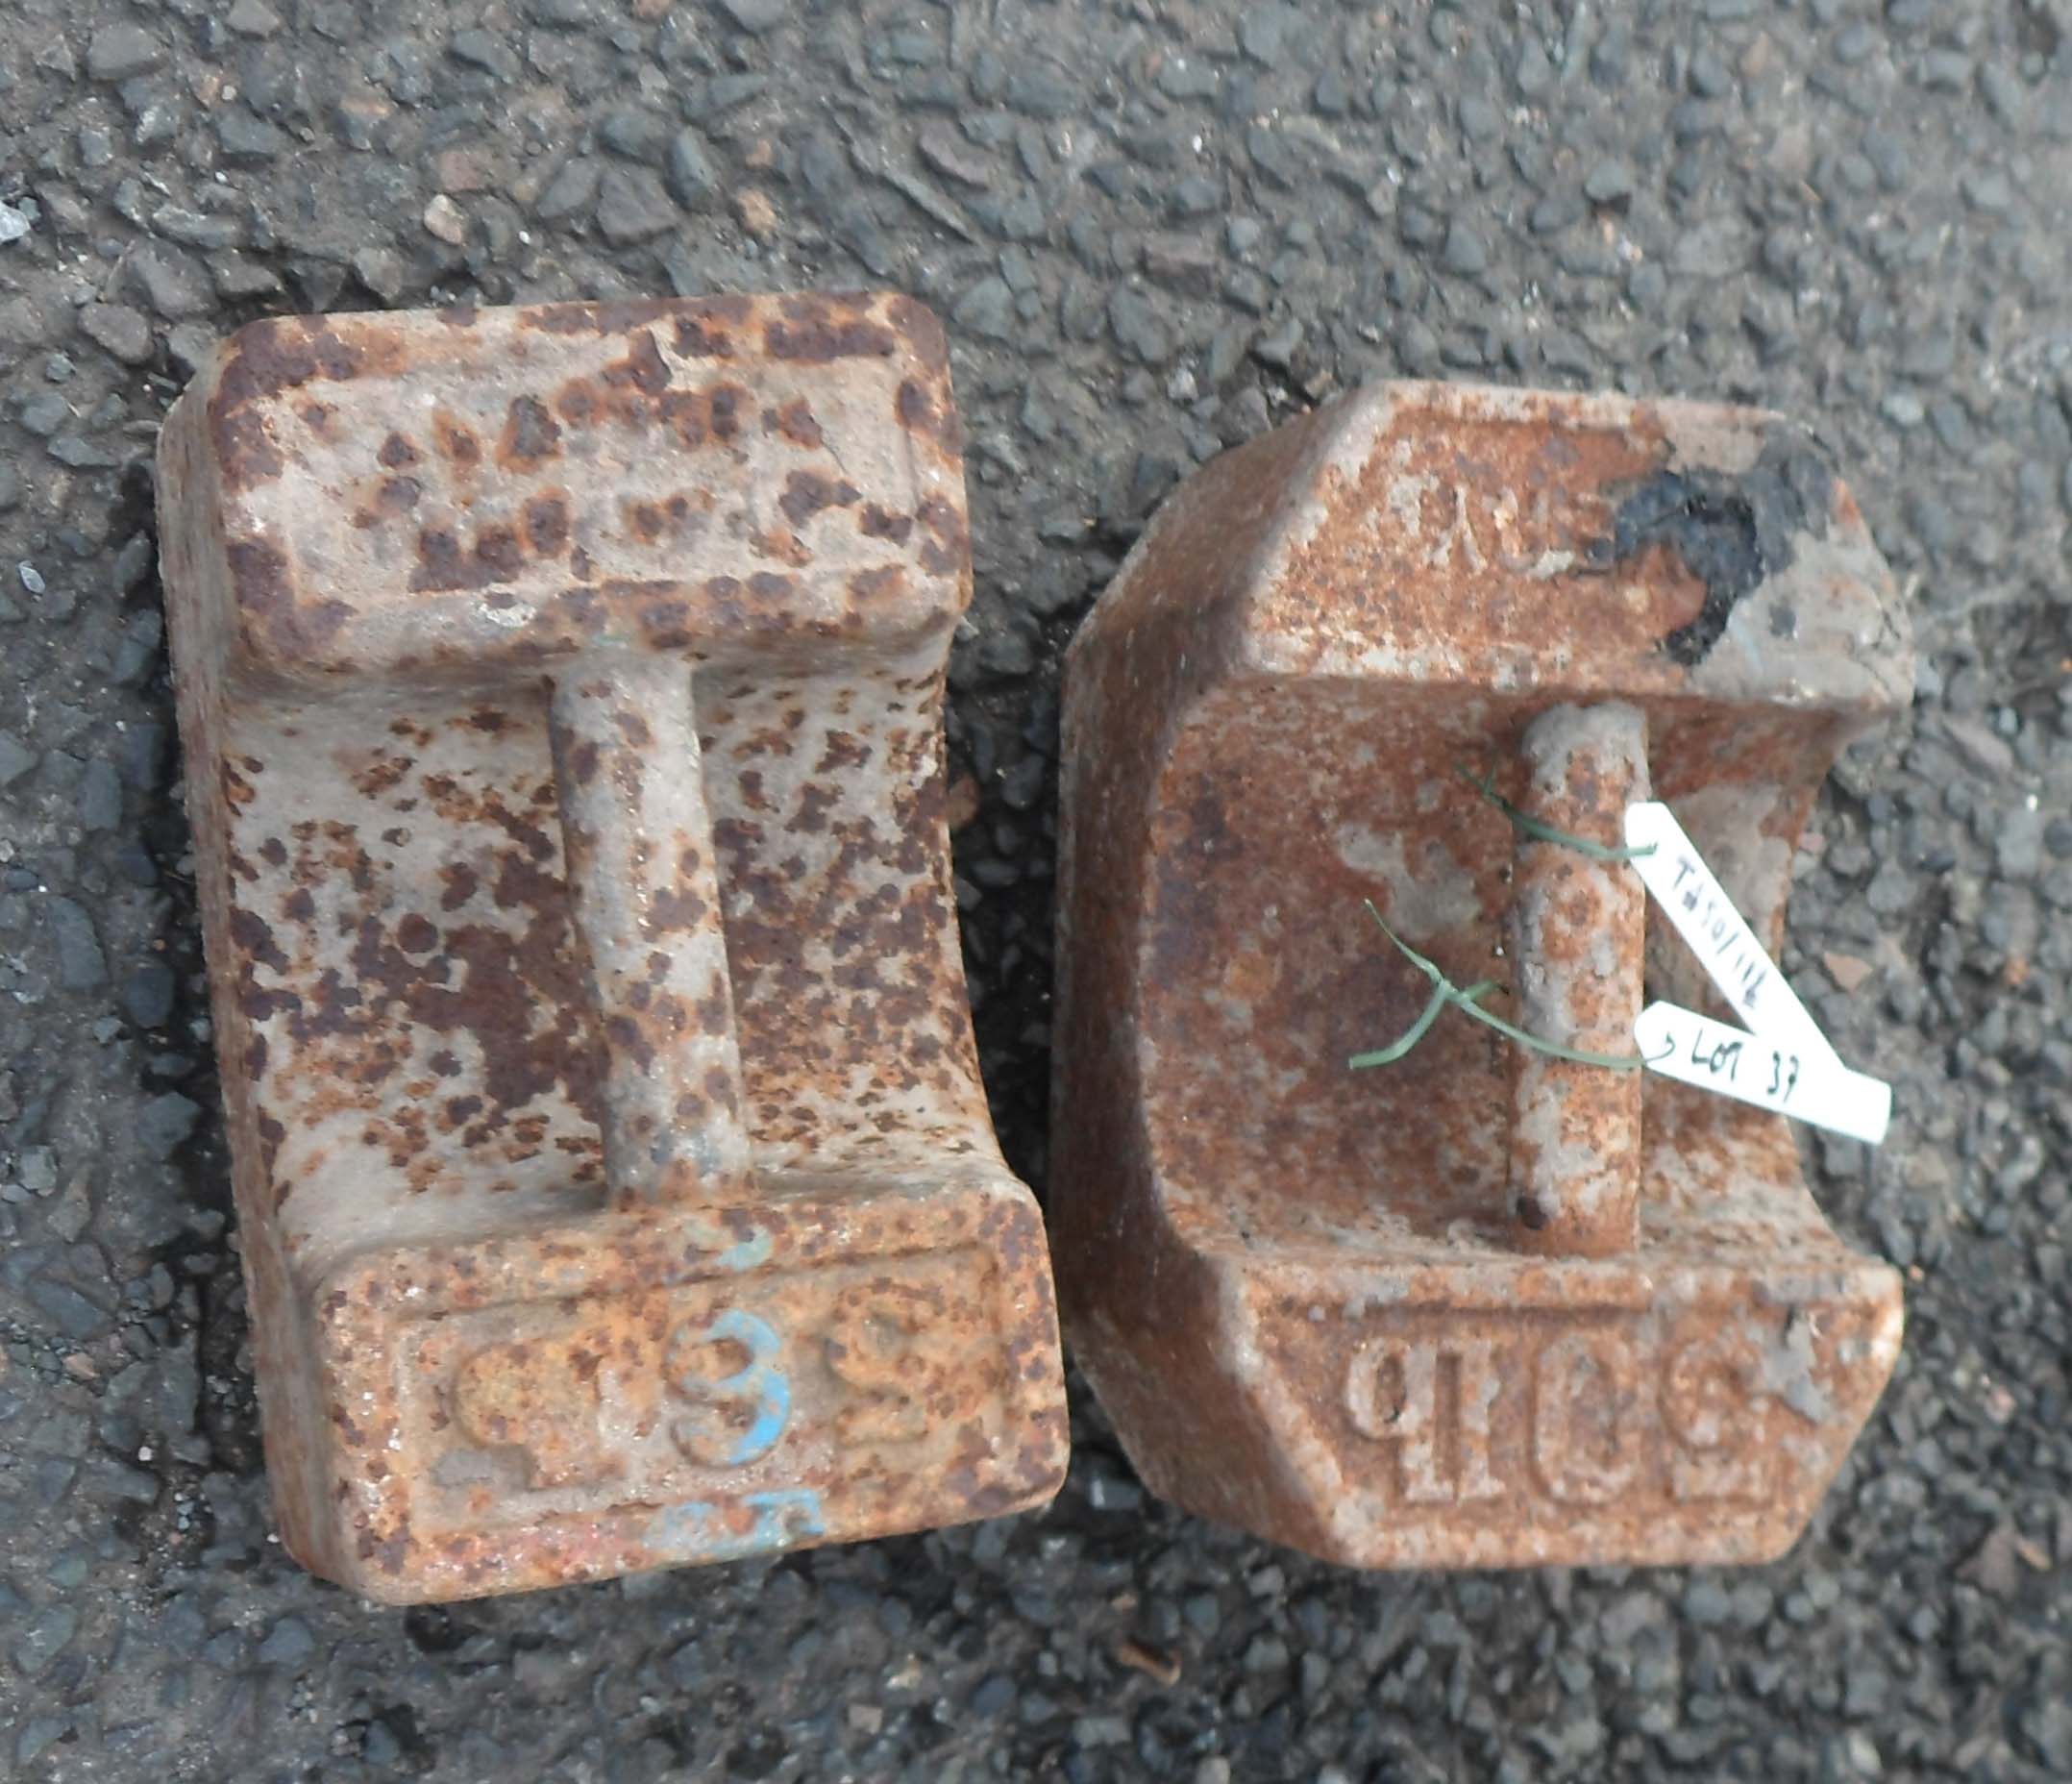 An old cast iron 56lb weight - sold with a similar 50lb weight